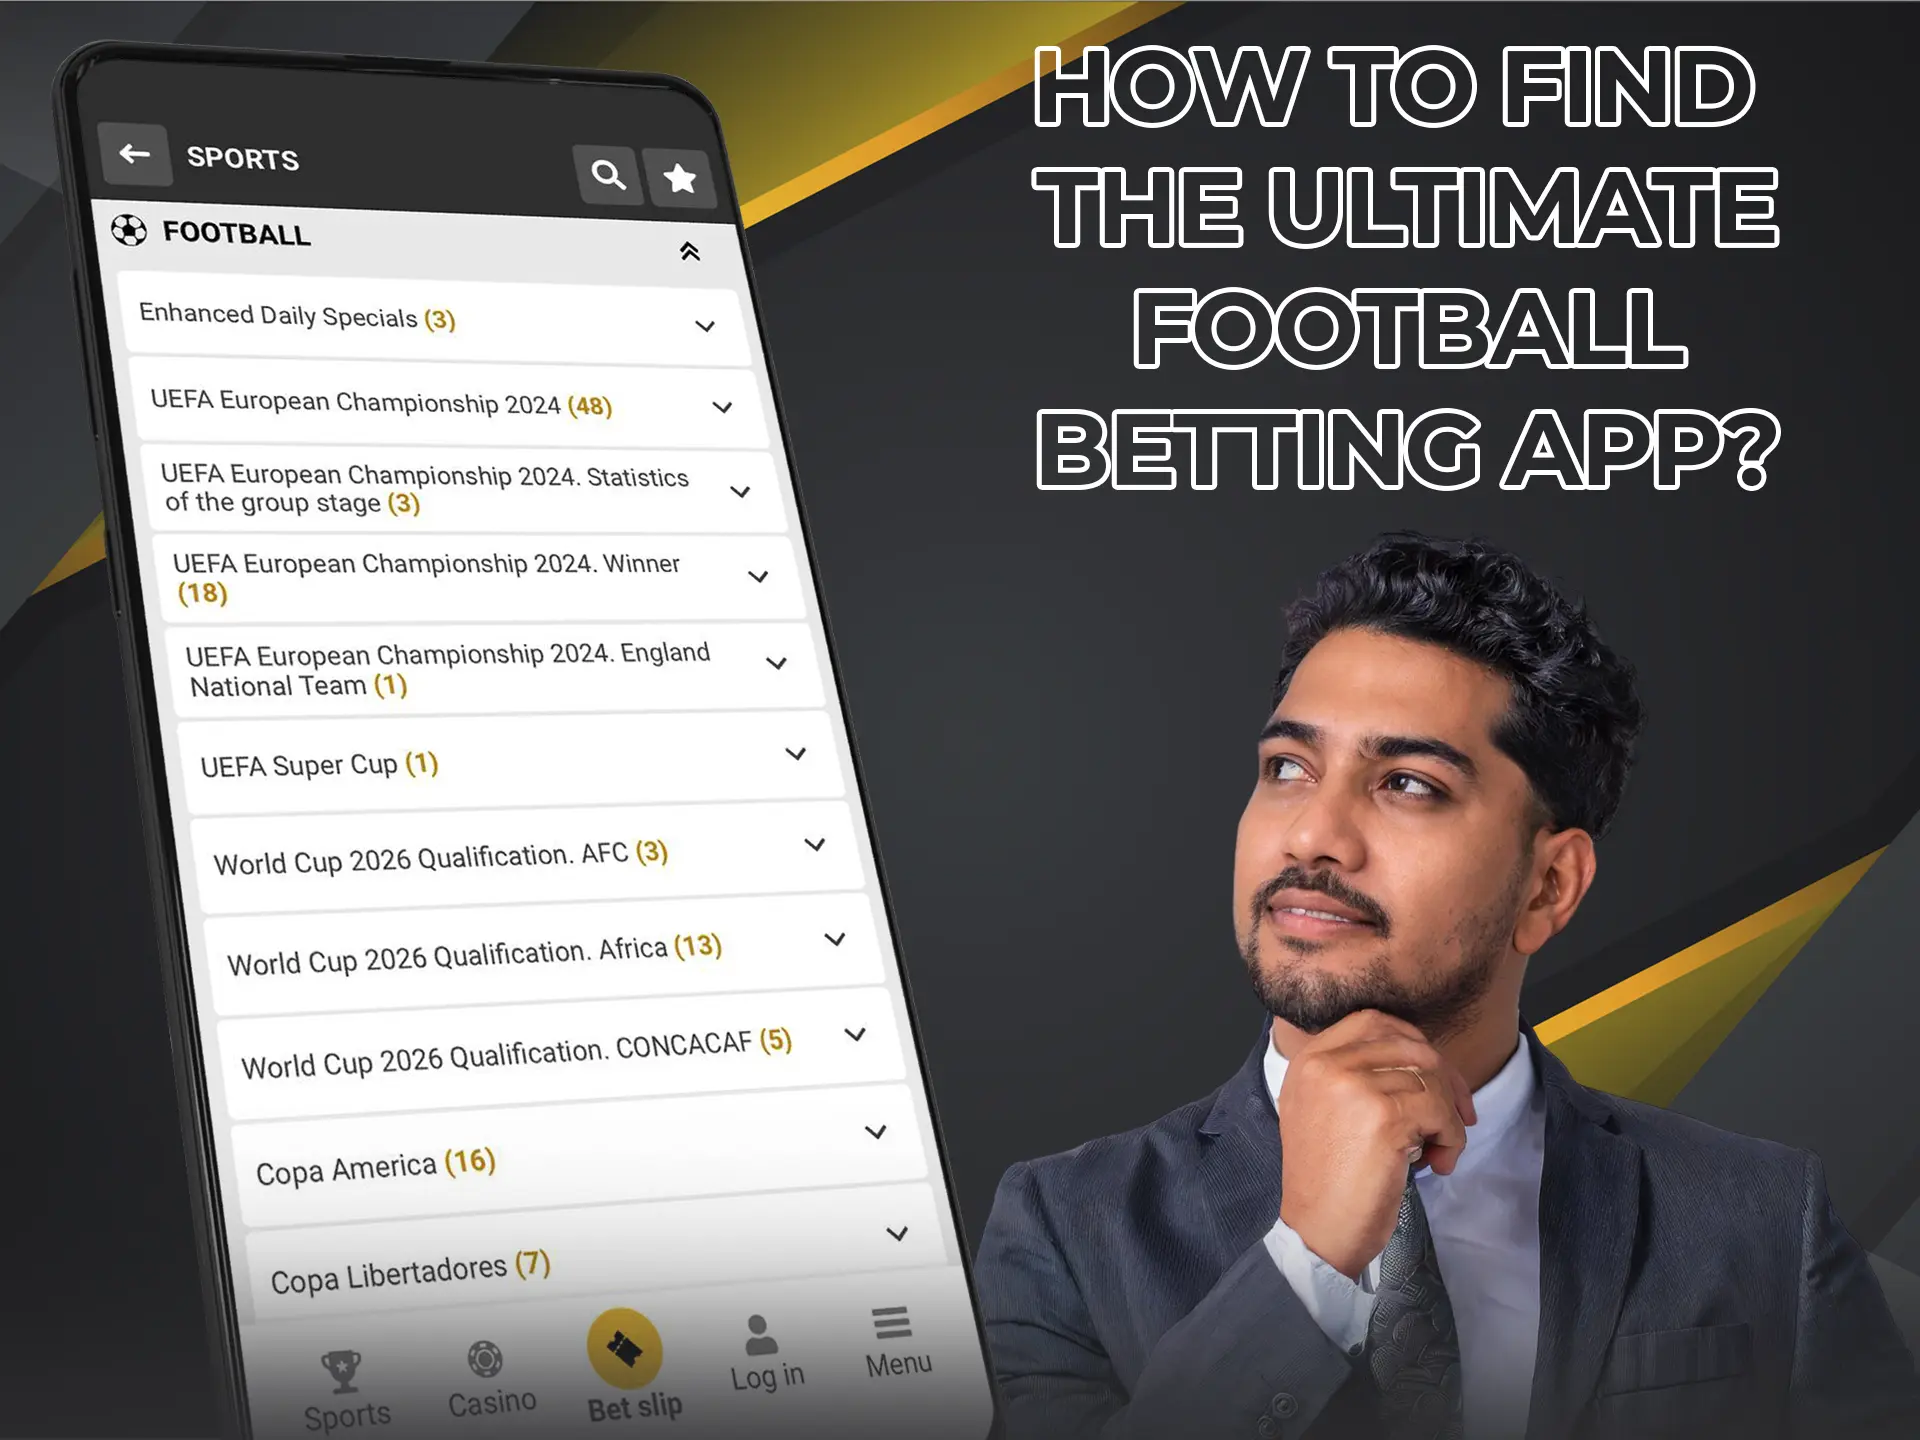 Learn the basic rules for choosing a betting app that is favourable for you.